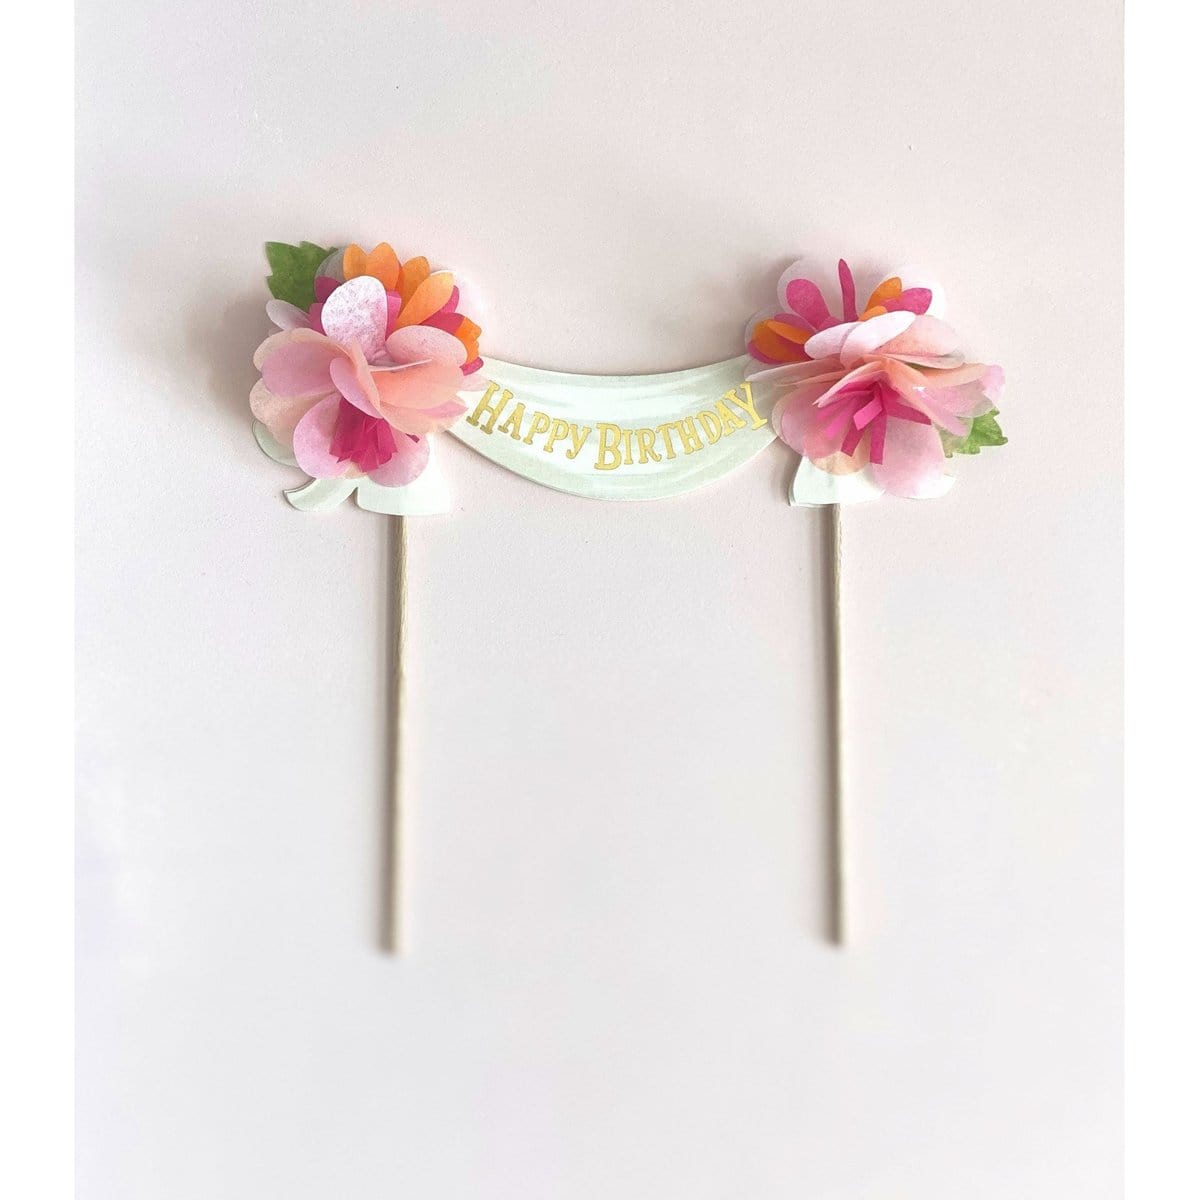 Floral Pennant Happy Birthday Cake Topper